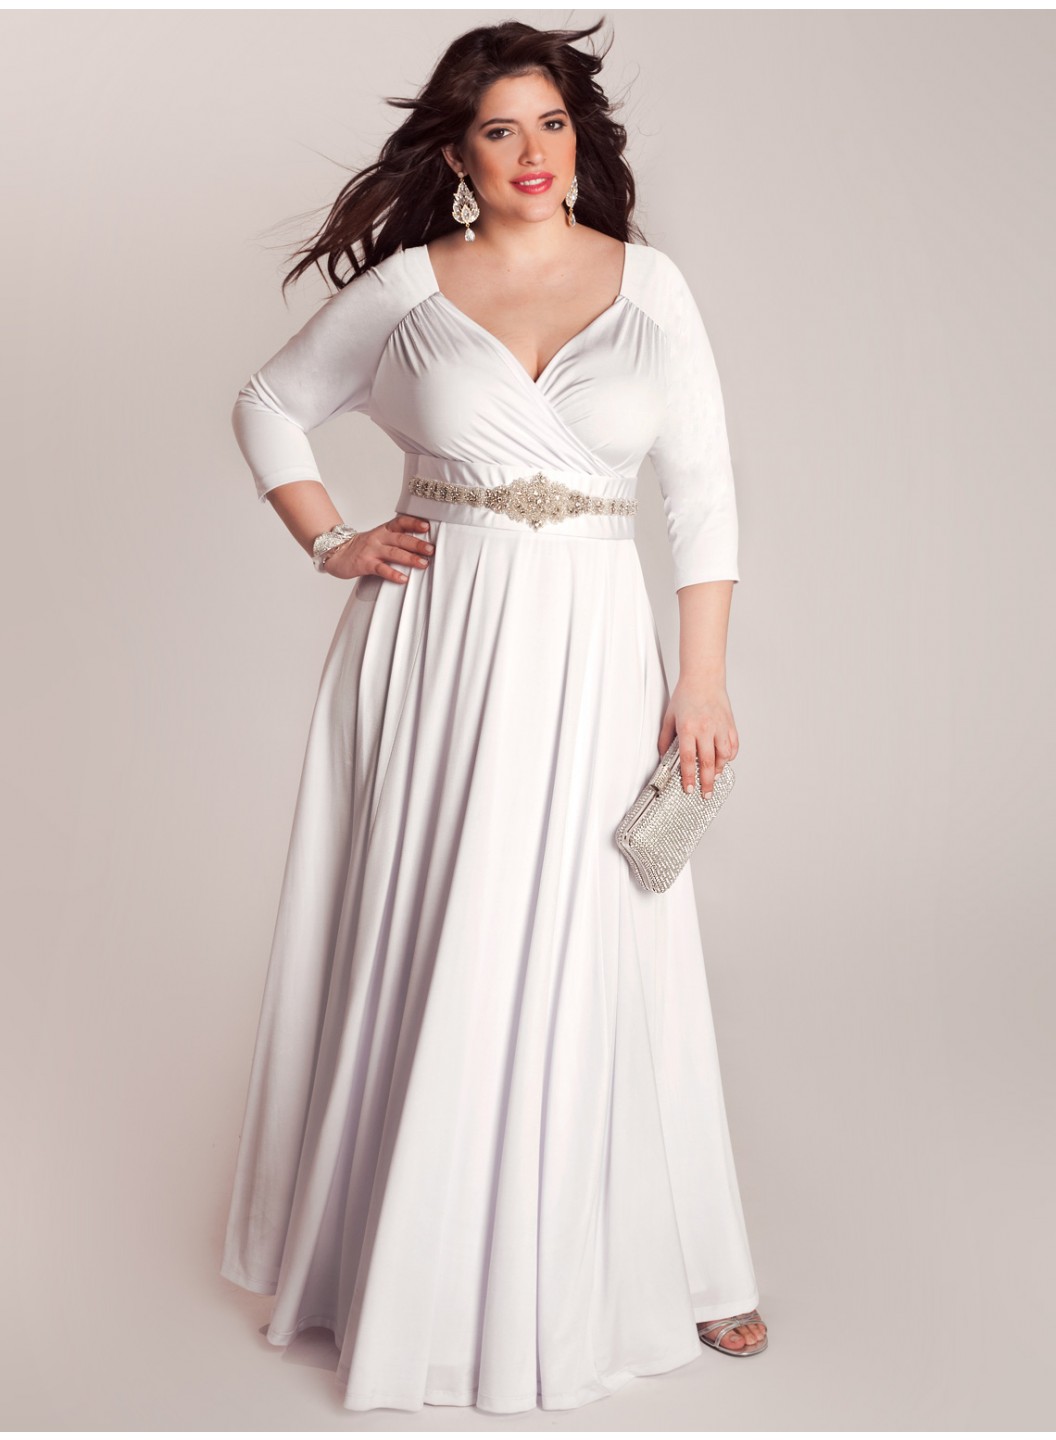 Long Jacket Dresses Plus Size : Help You Stand Out